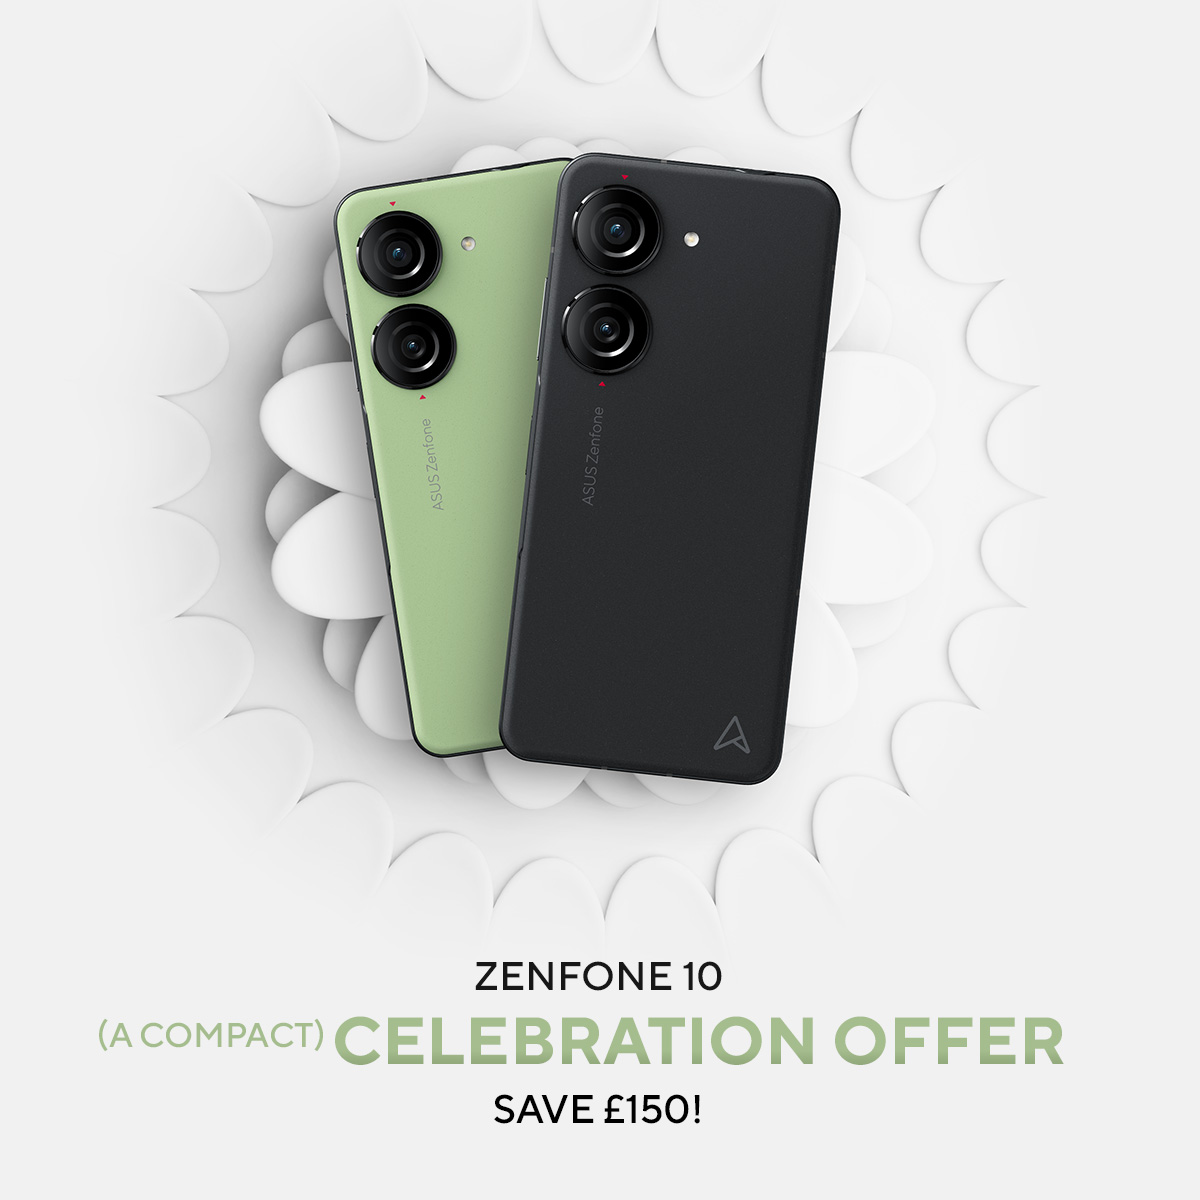 Grab the award-winning and compact #Zenfone10 for just £599, but act fast - this deal won't last long! 🚀 uk.asus.click/ZF10deal_x